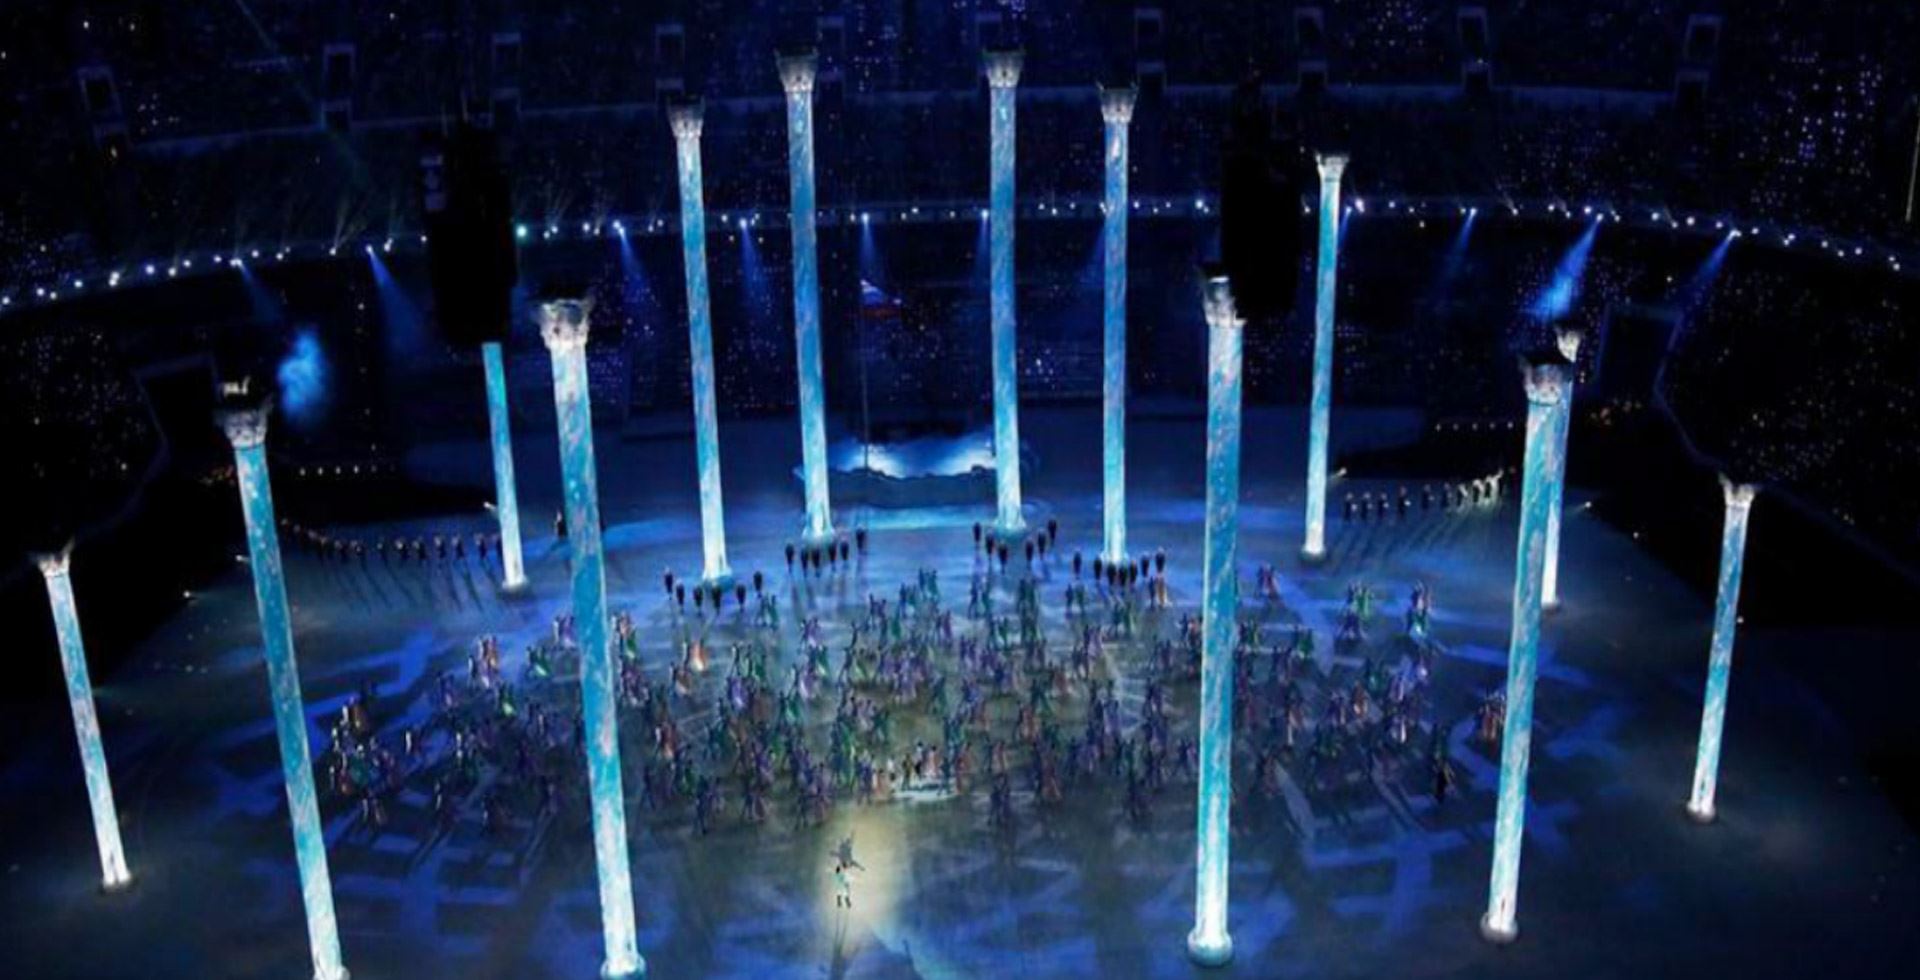 The 22nd Winter Olympic Games